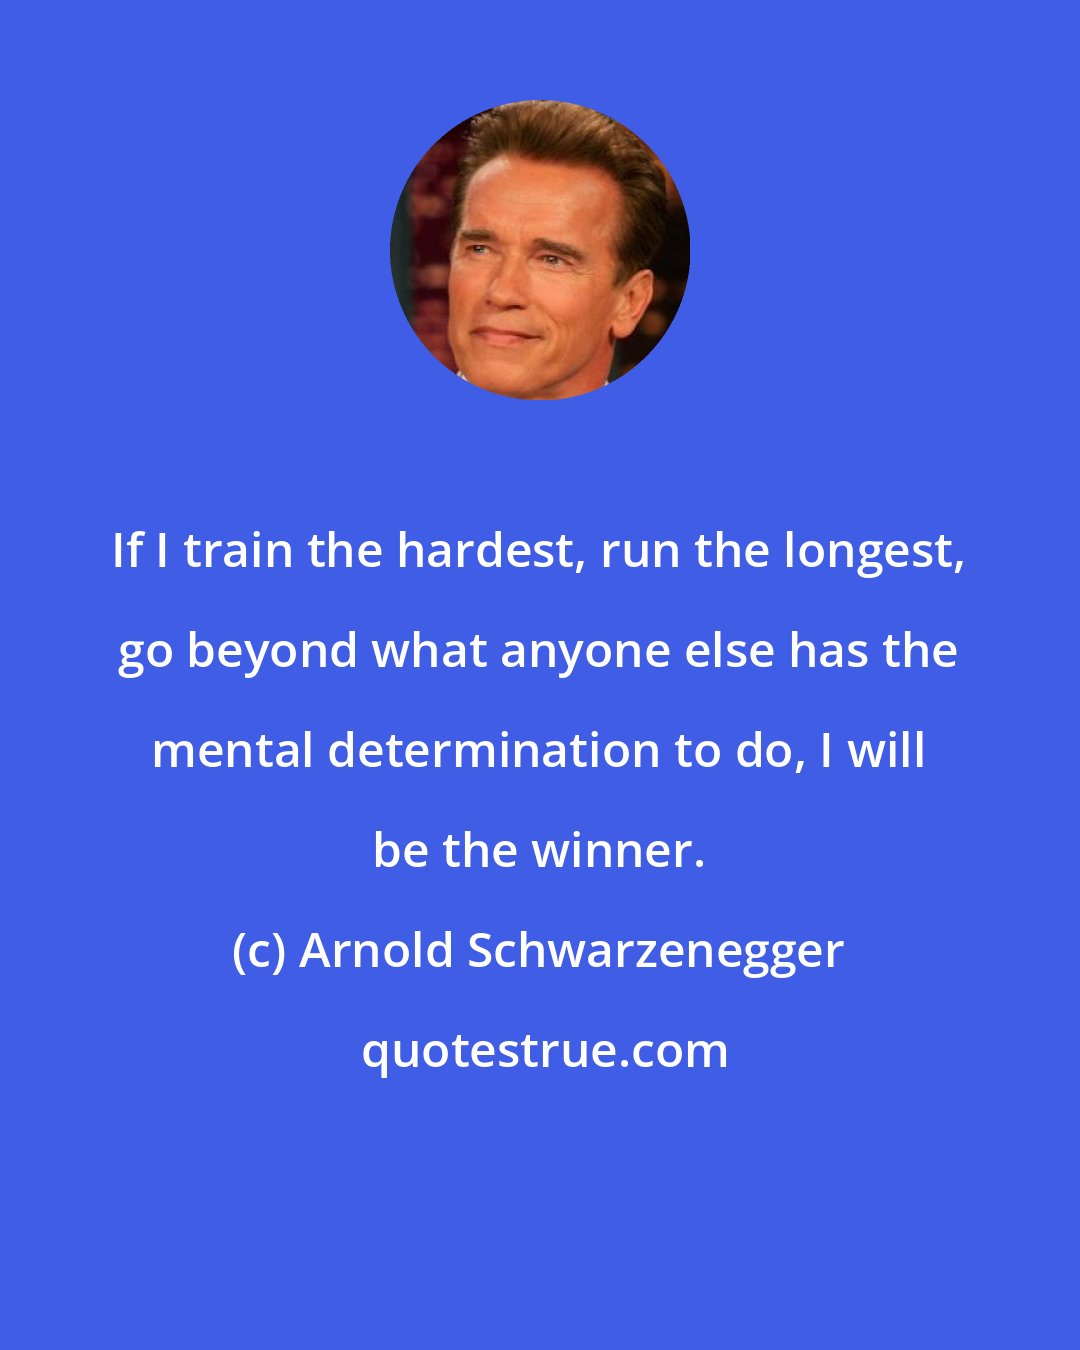 Arnold Schwarzenegger: If I train the hardest, run the longest, go beyond what anyone else has the mental determination to do, I will be the winner.